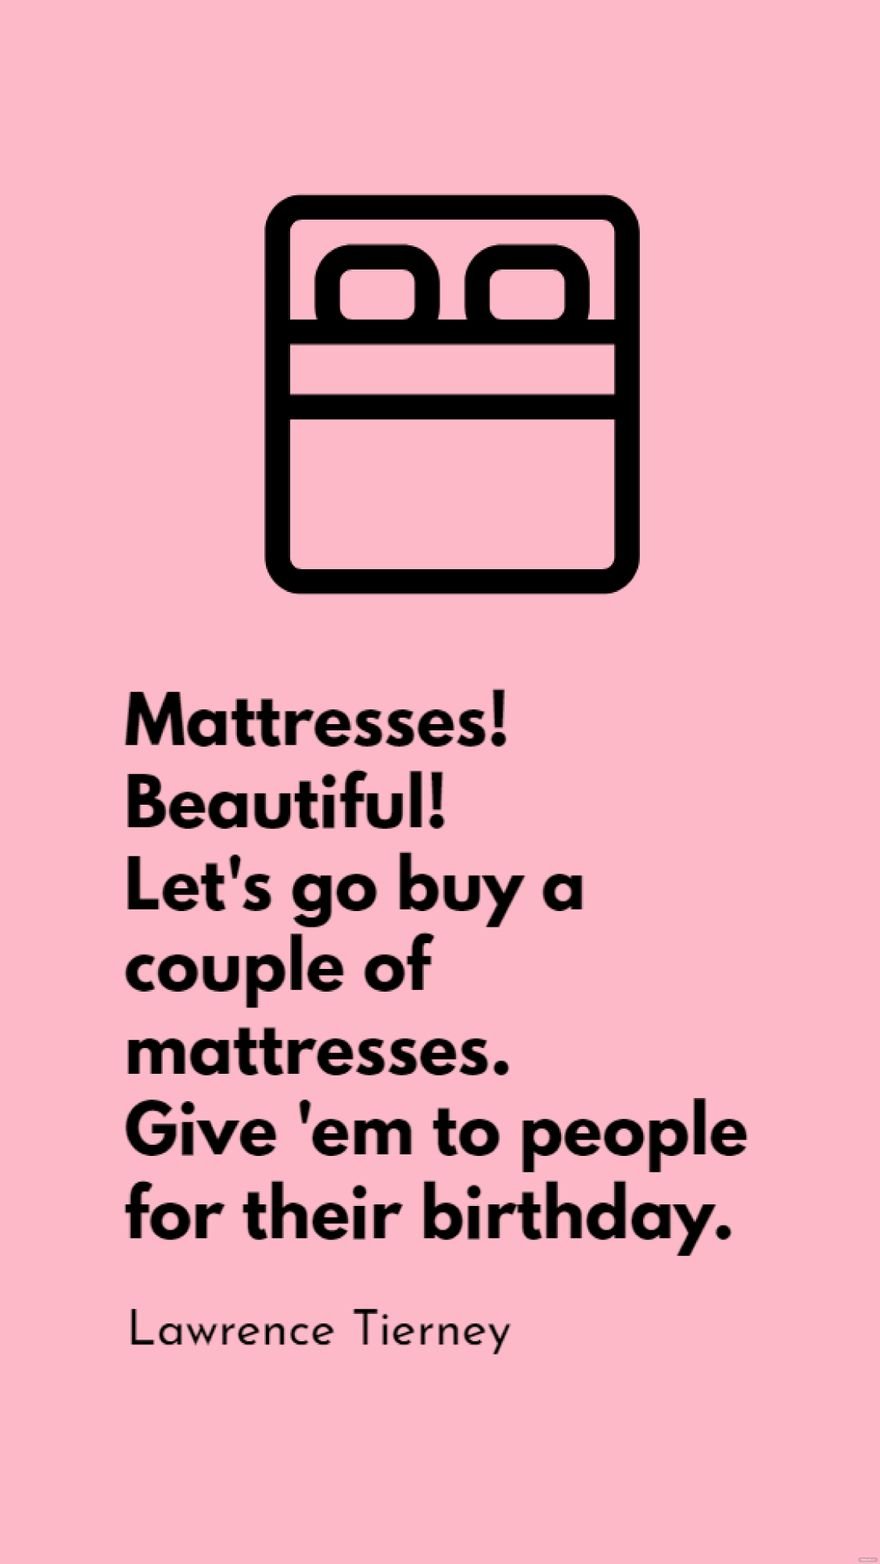 Lawrence Tierney - Mattresses! Beautiful! Let's go buy a couple of mattresses. Give 'em to people for their birthday. in JPG